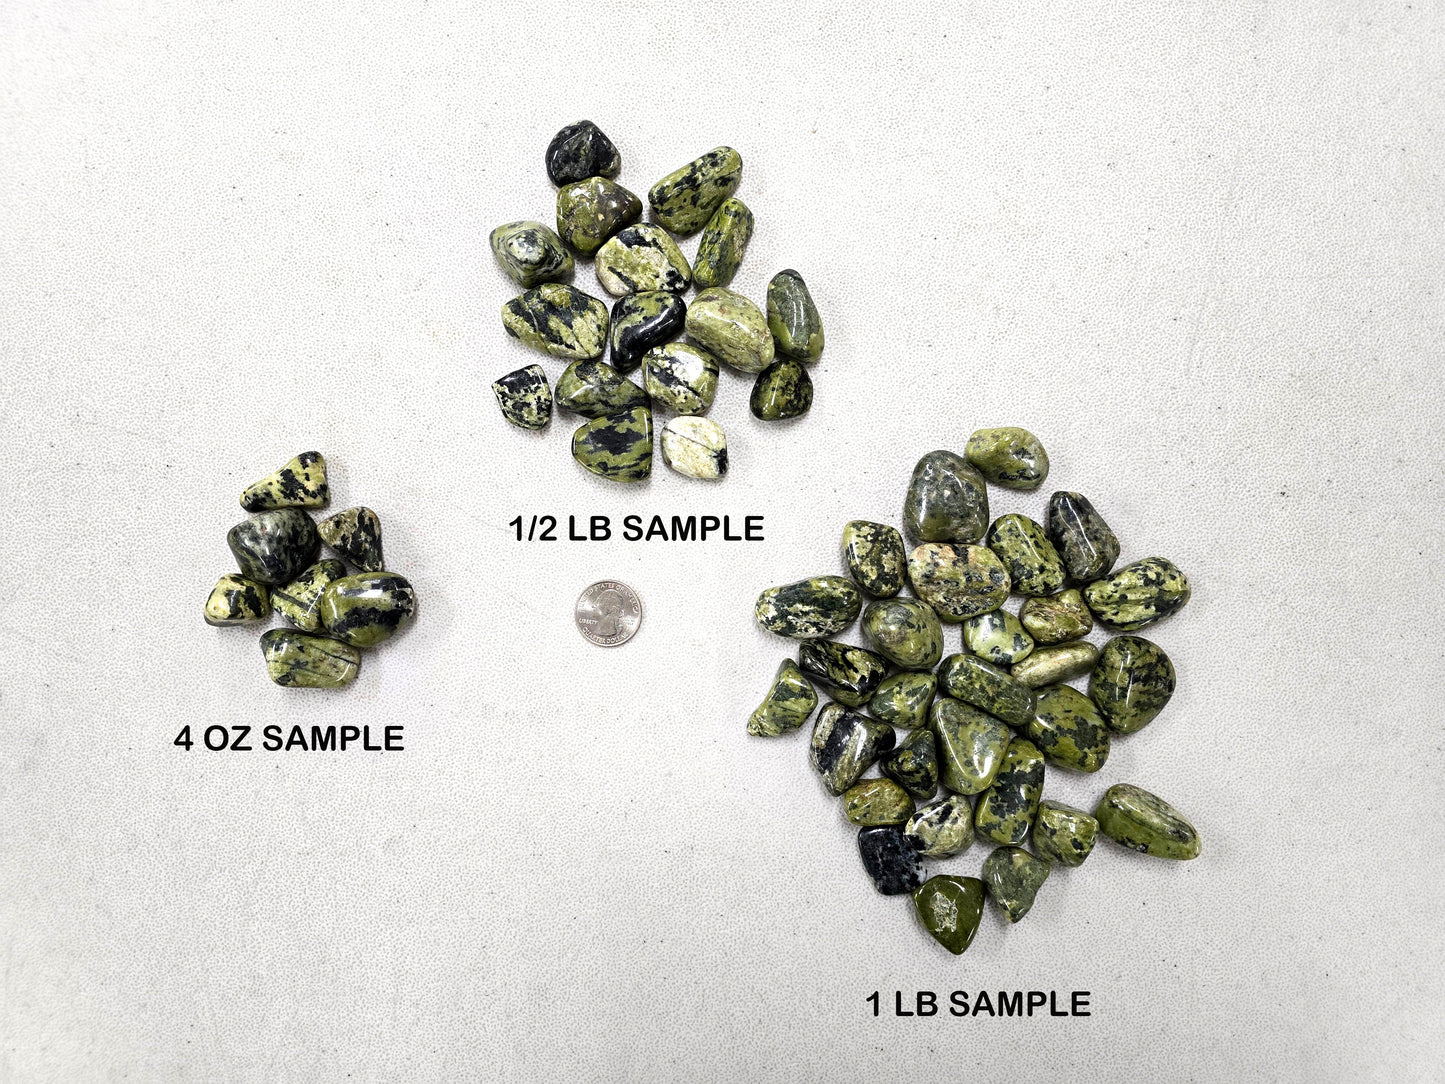 Tumbled Green Serpentine Crystal Stones from India